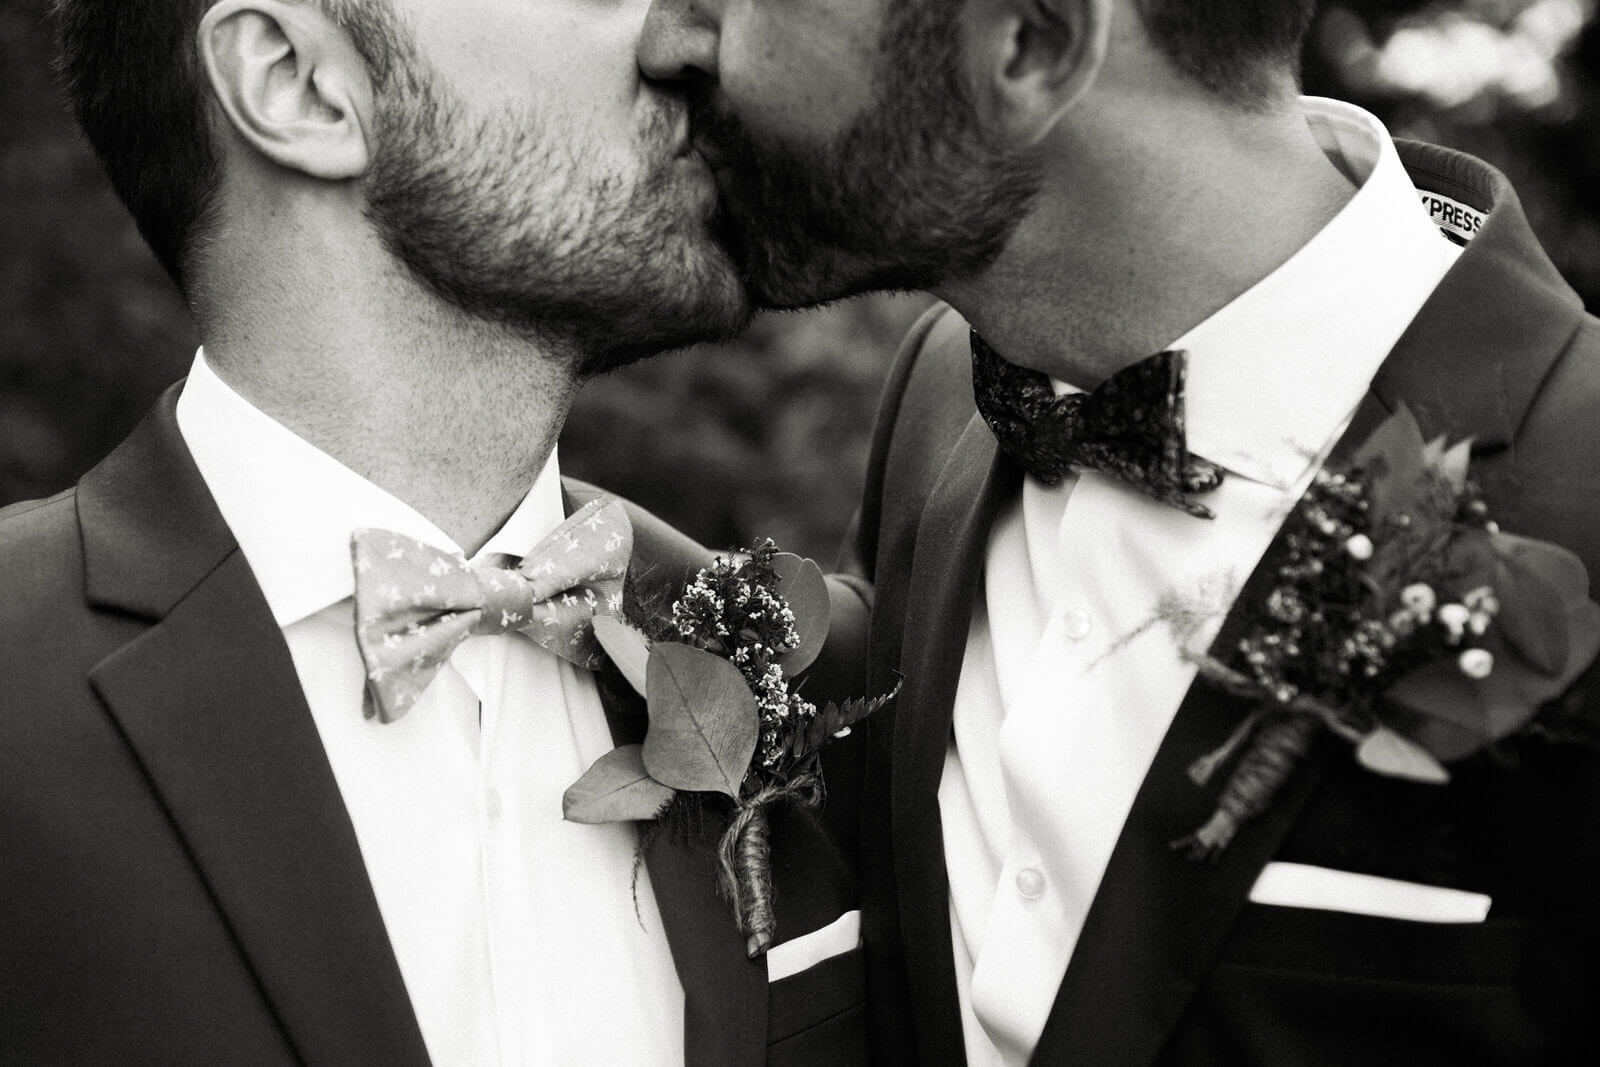 Two grooms kiss at their wedding in Kimberly British Columbia at the Kimberley Alpine Resort